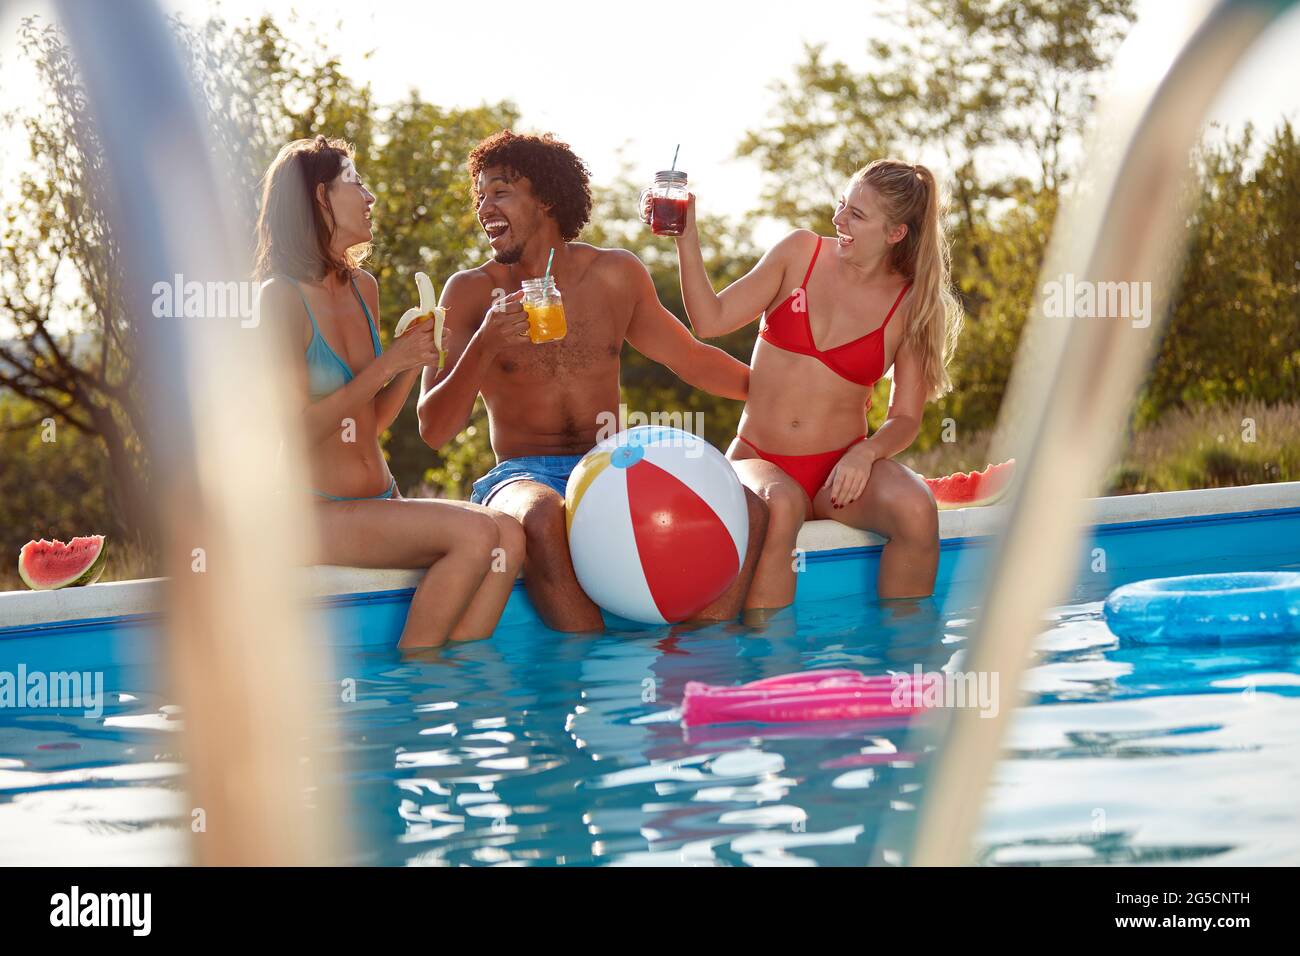 spontaneously  caught moment of afro-american young man having fun with two caucasian females outdoor in the nature by the pool Stock Photo